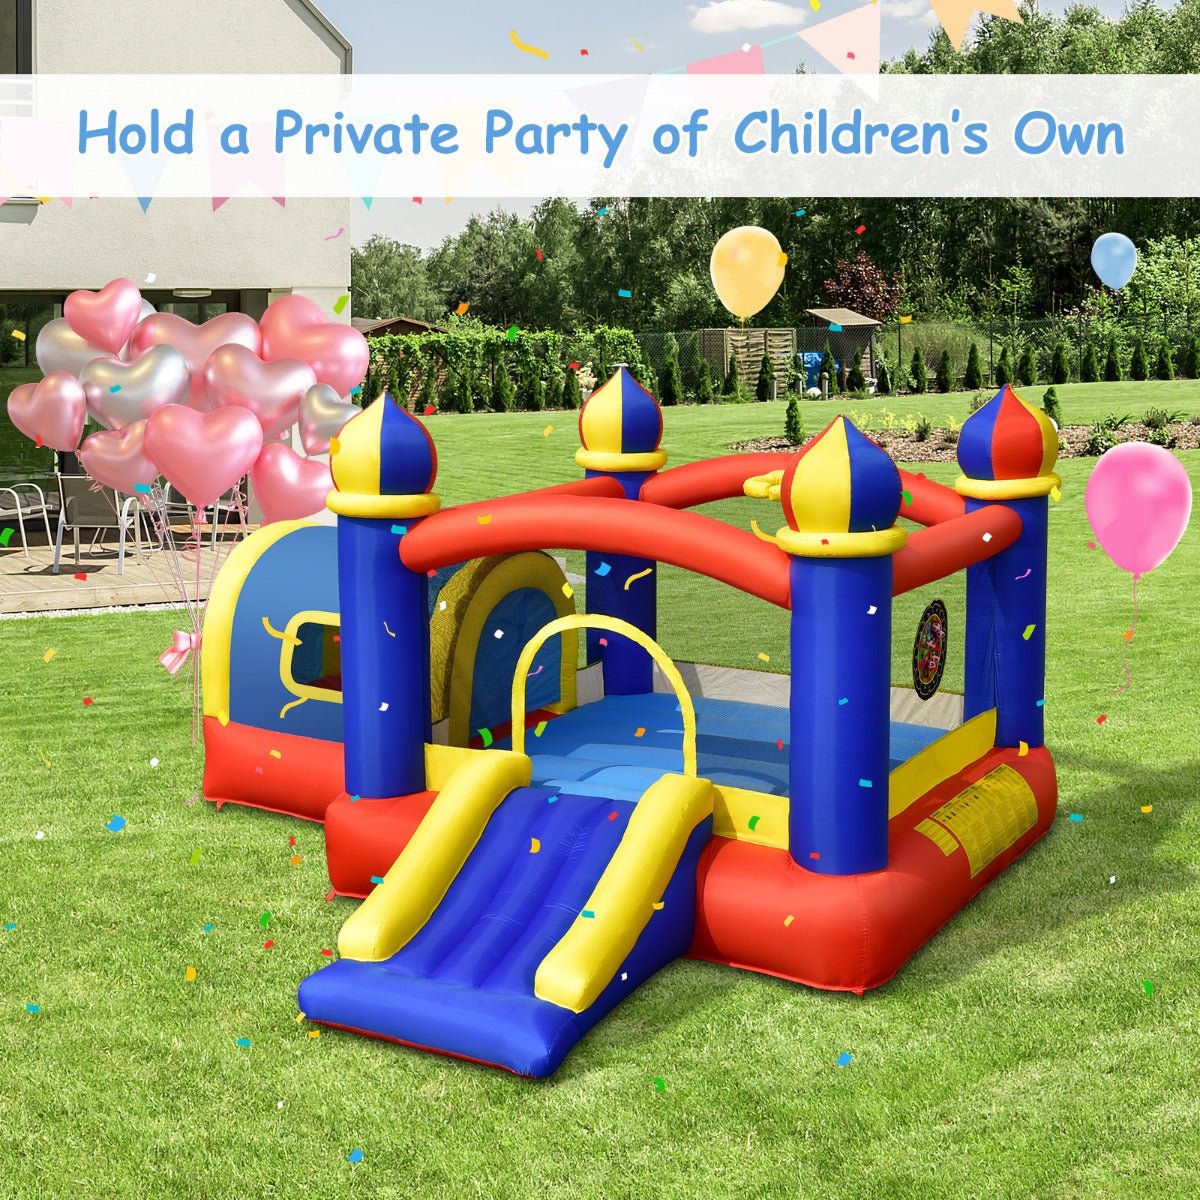 Inflatable Castle Playhouse - Slide & Multi-Activity Fun (No Blower)